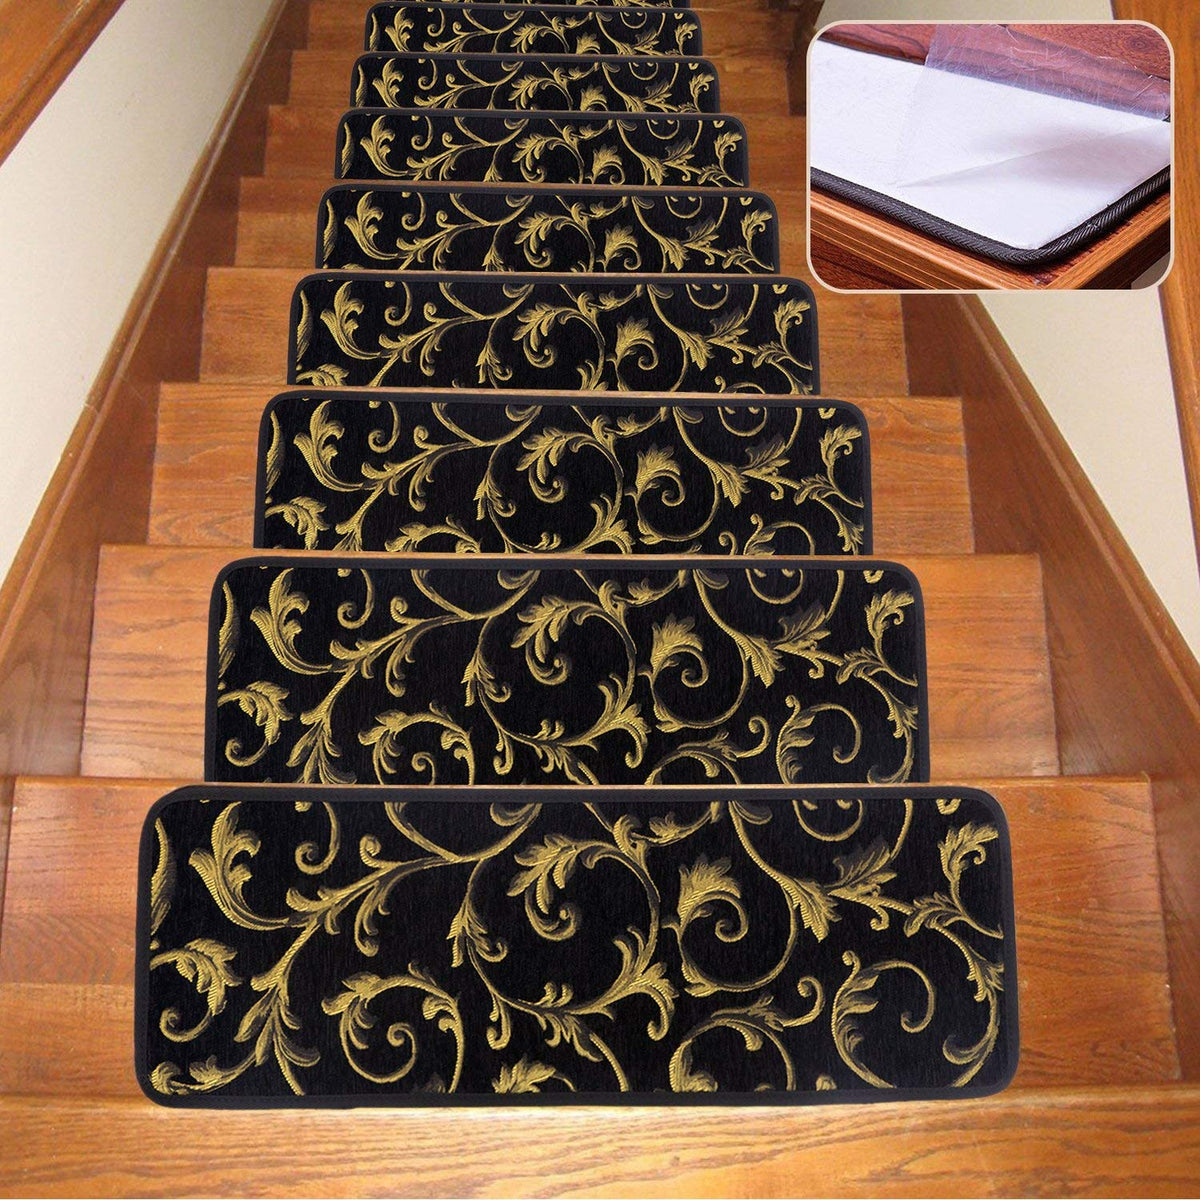 Seloom Carpet Stair Treads Indoor Non Slip Stair Rugs/Covers Rubber Ba